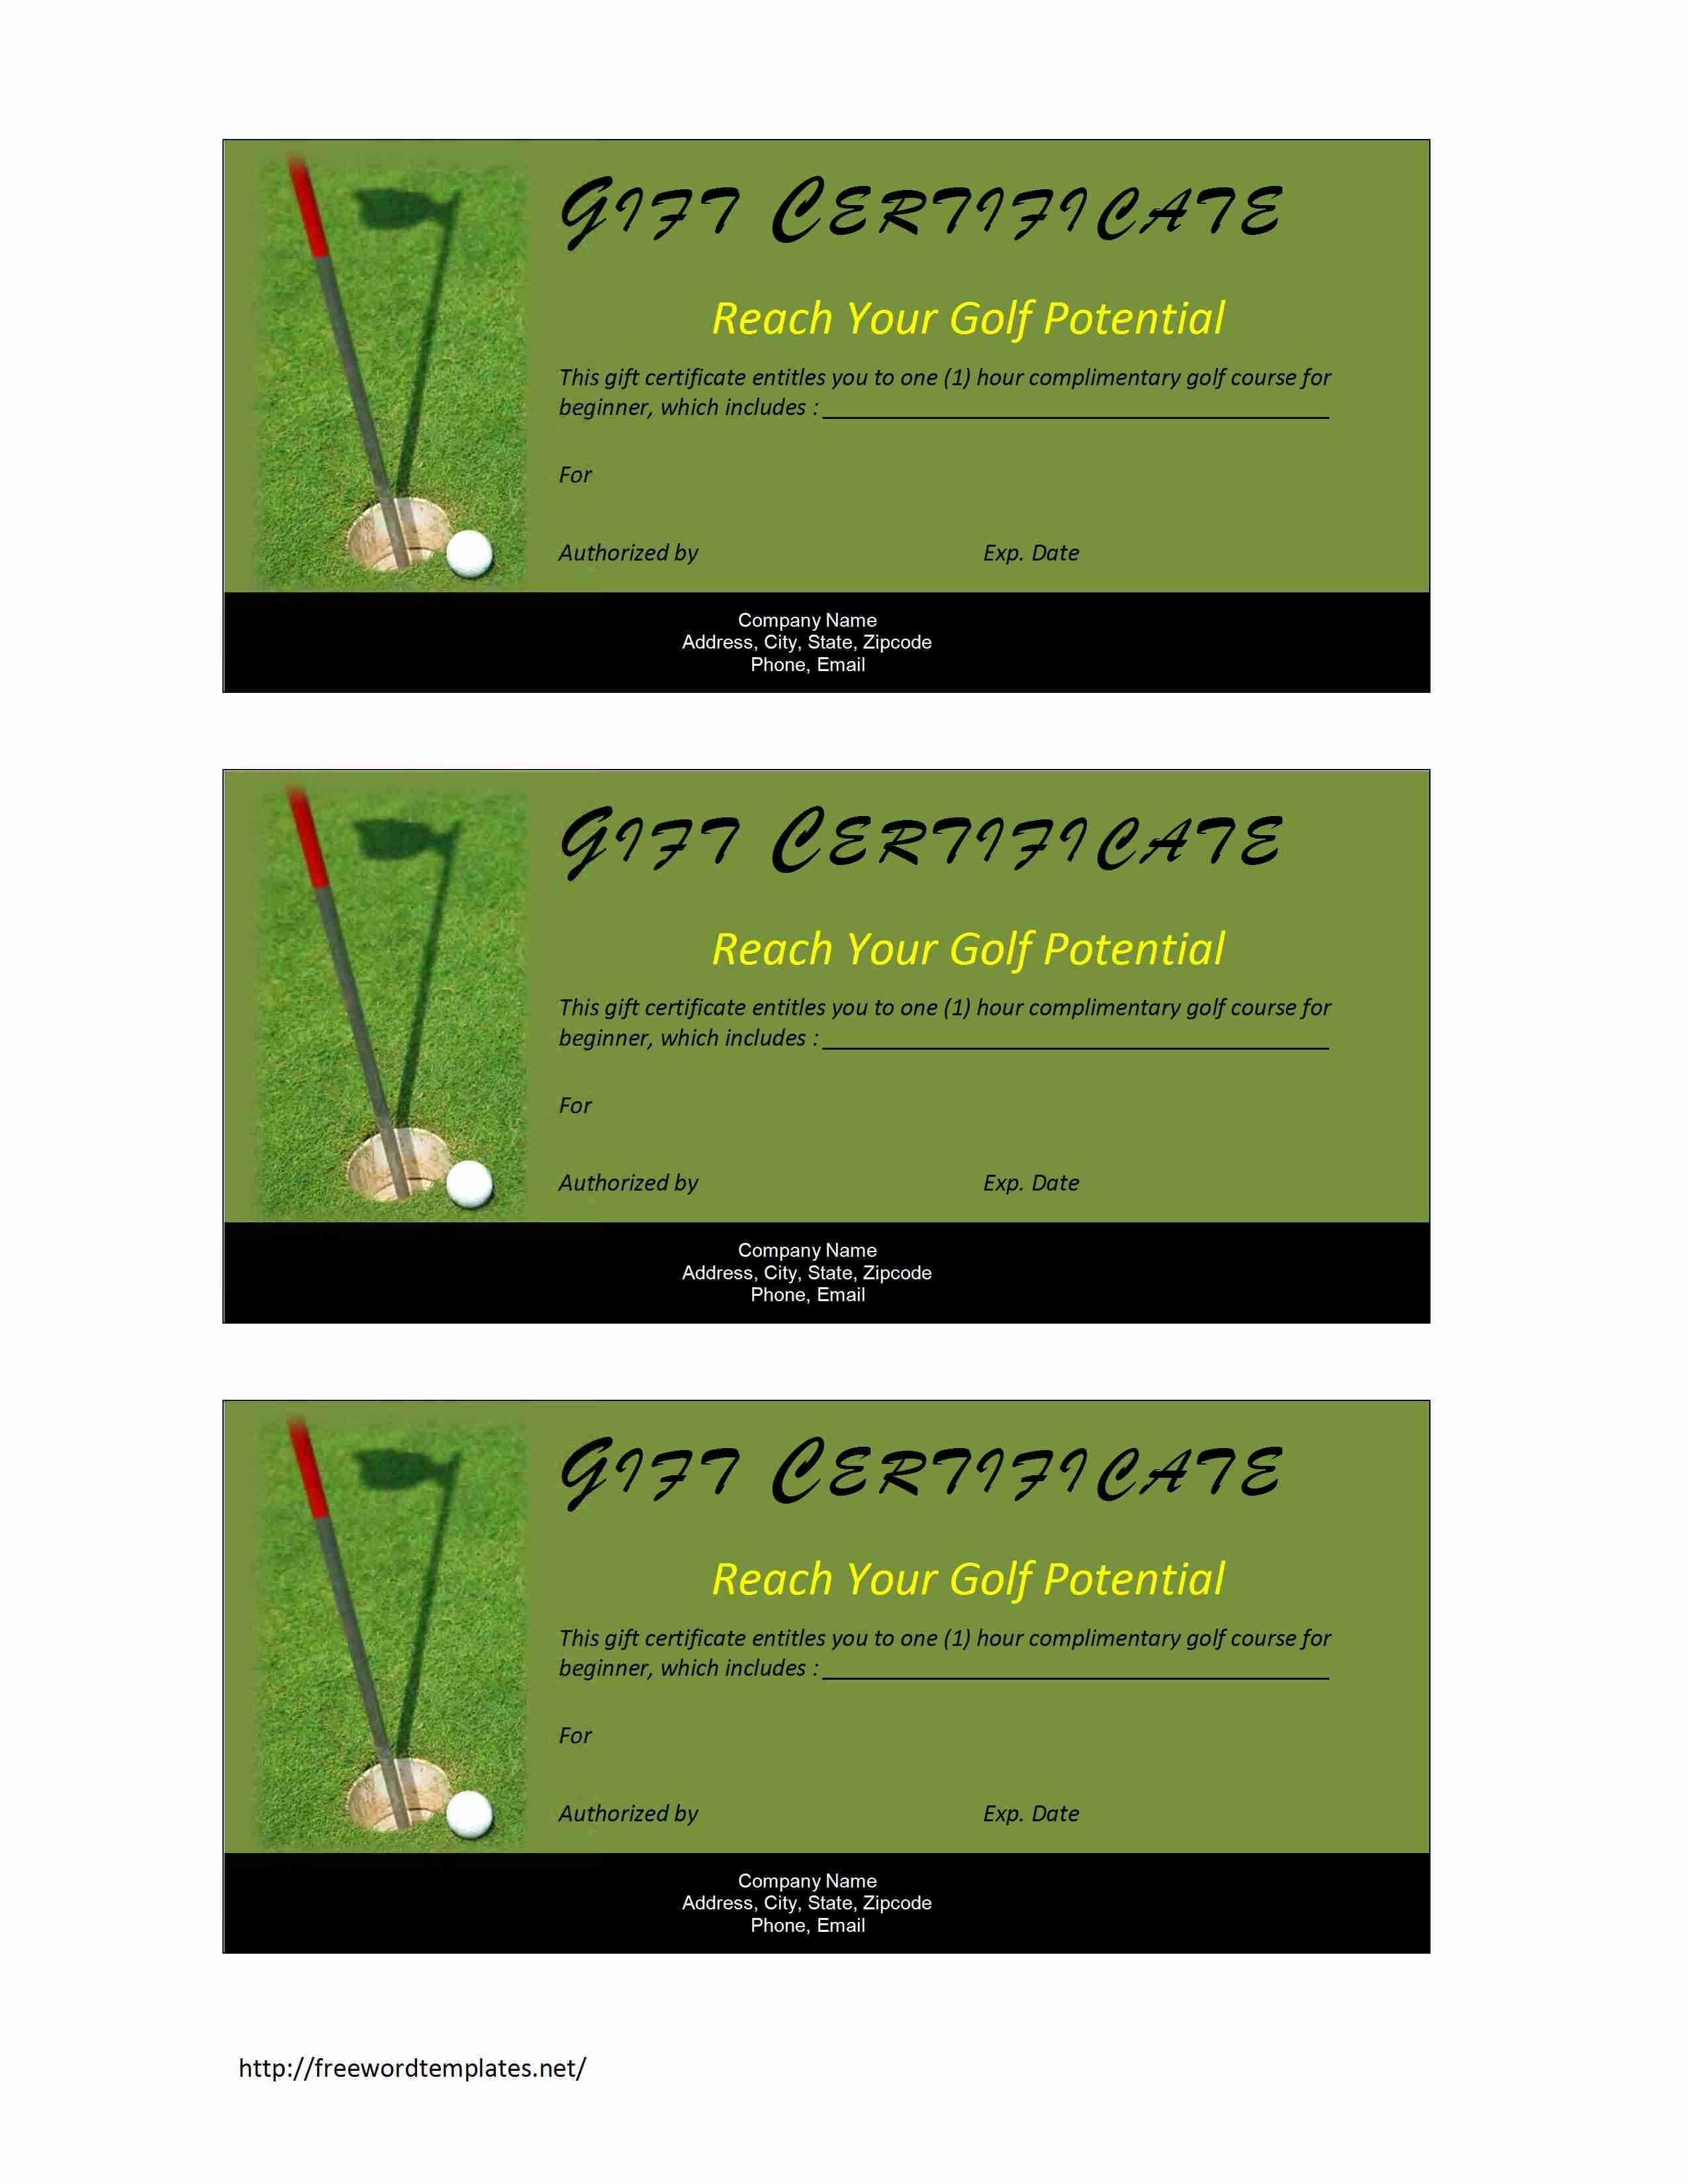 Golf Gift Certificate Throughout Microsoft Gift Certificate Template Free Word